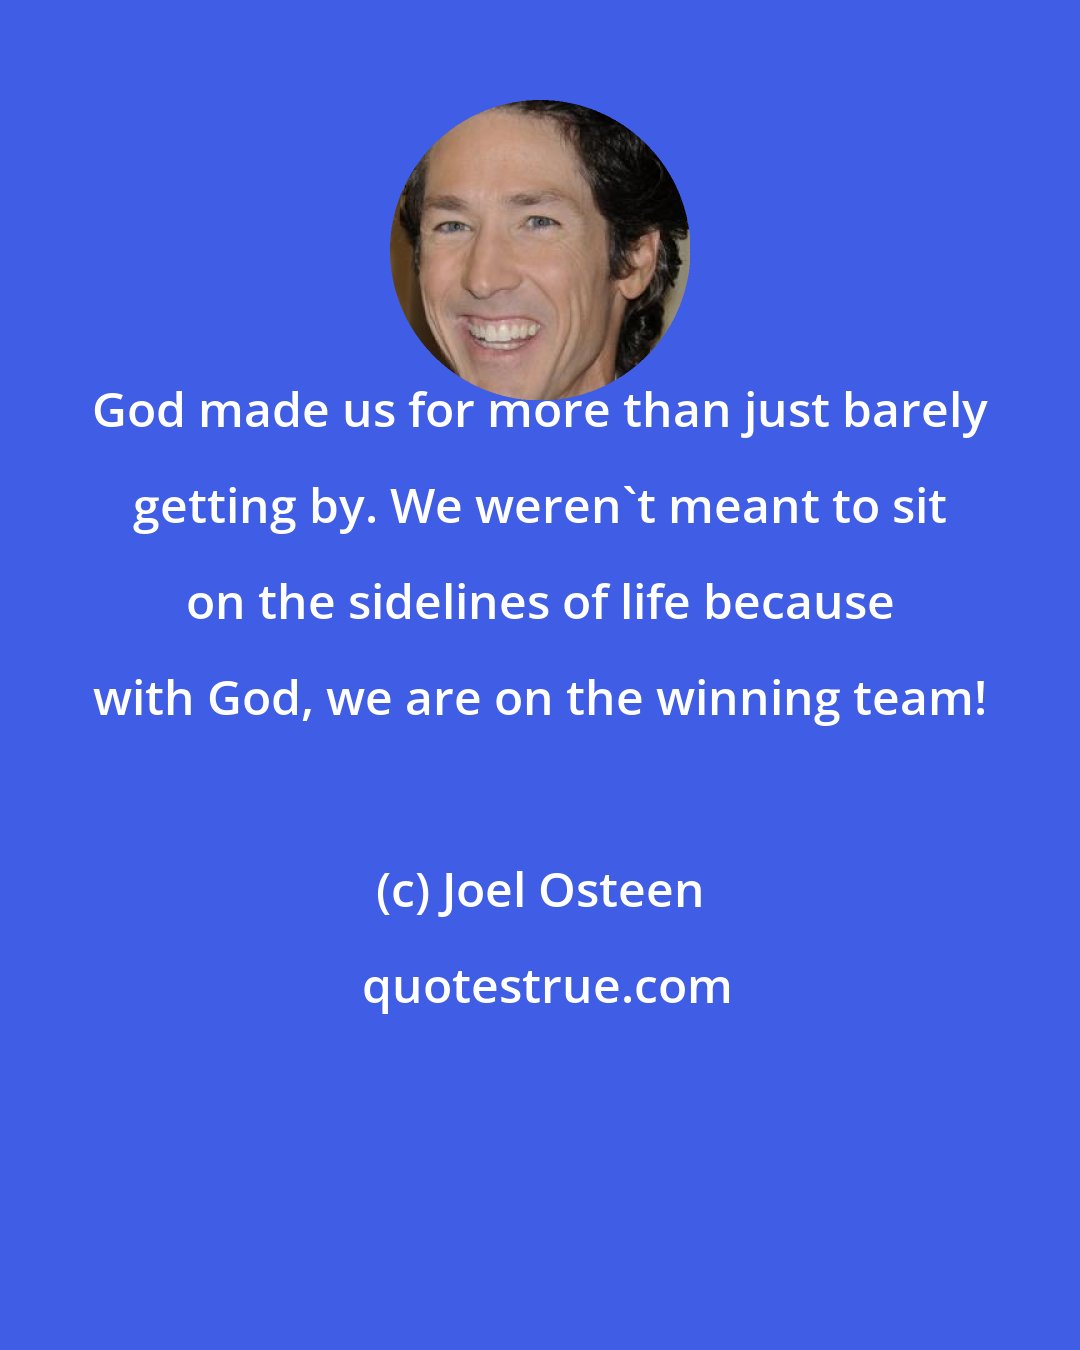 Joel Osteen: God made us for more than just barely getting by. We weren't meant to sit on the sidelines of life because with God, we are on the winning team!